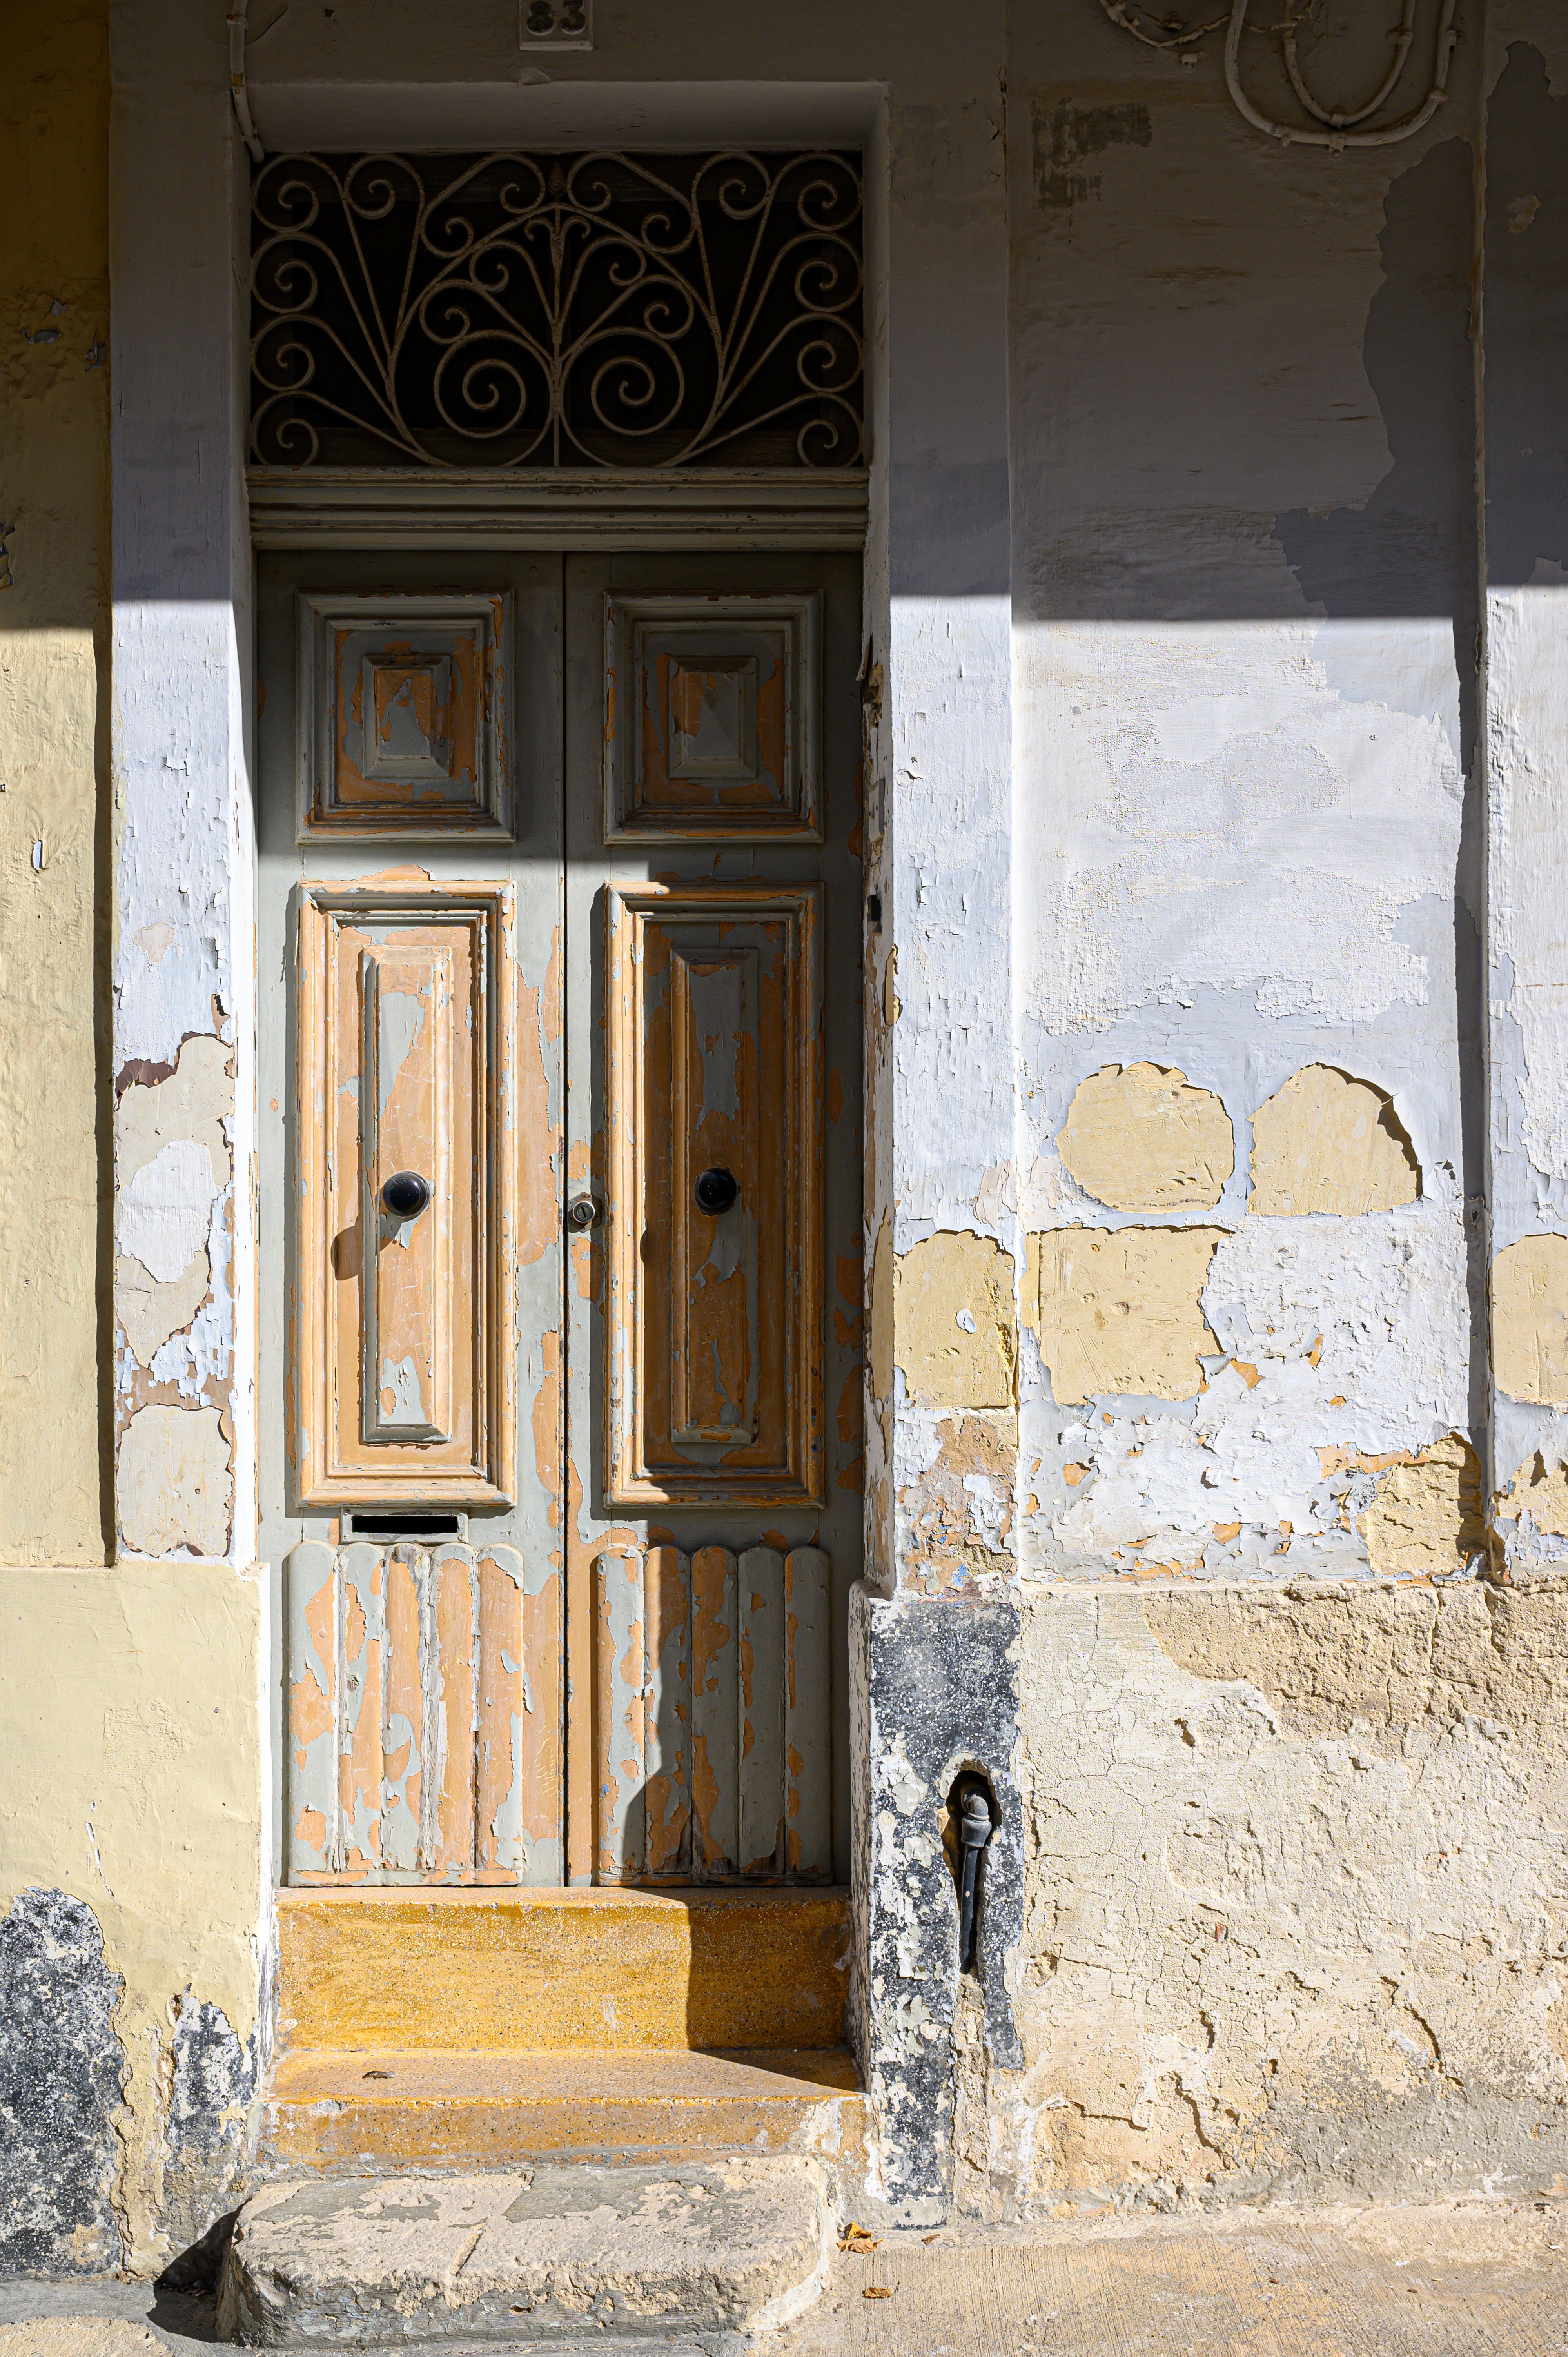 Weathered doorway painted yellow and blue in Malta